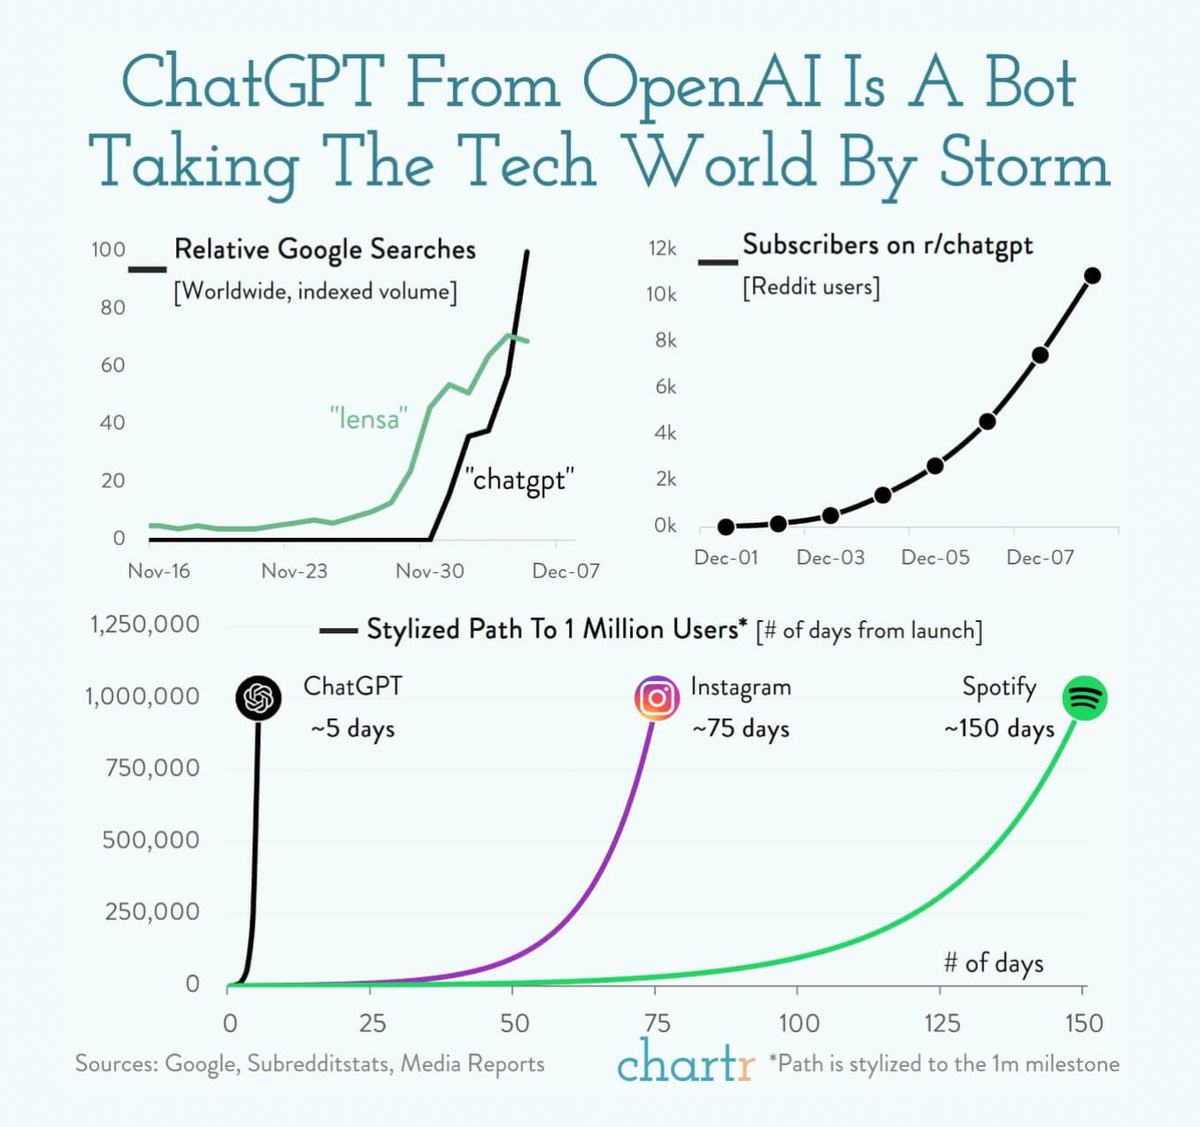 Picture of a Chartr graph that shows the growth of ChatGPT compared to Instagram and Spotify